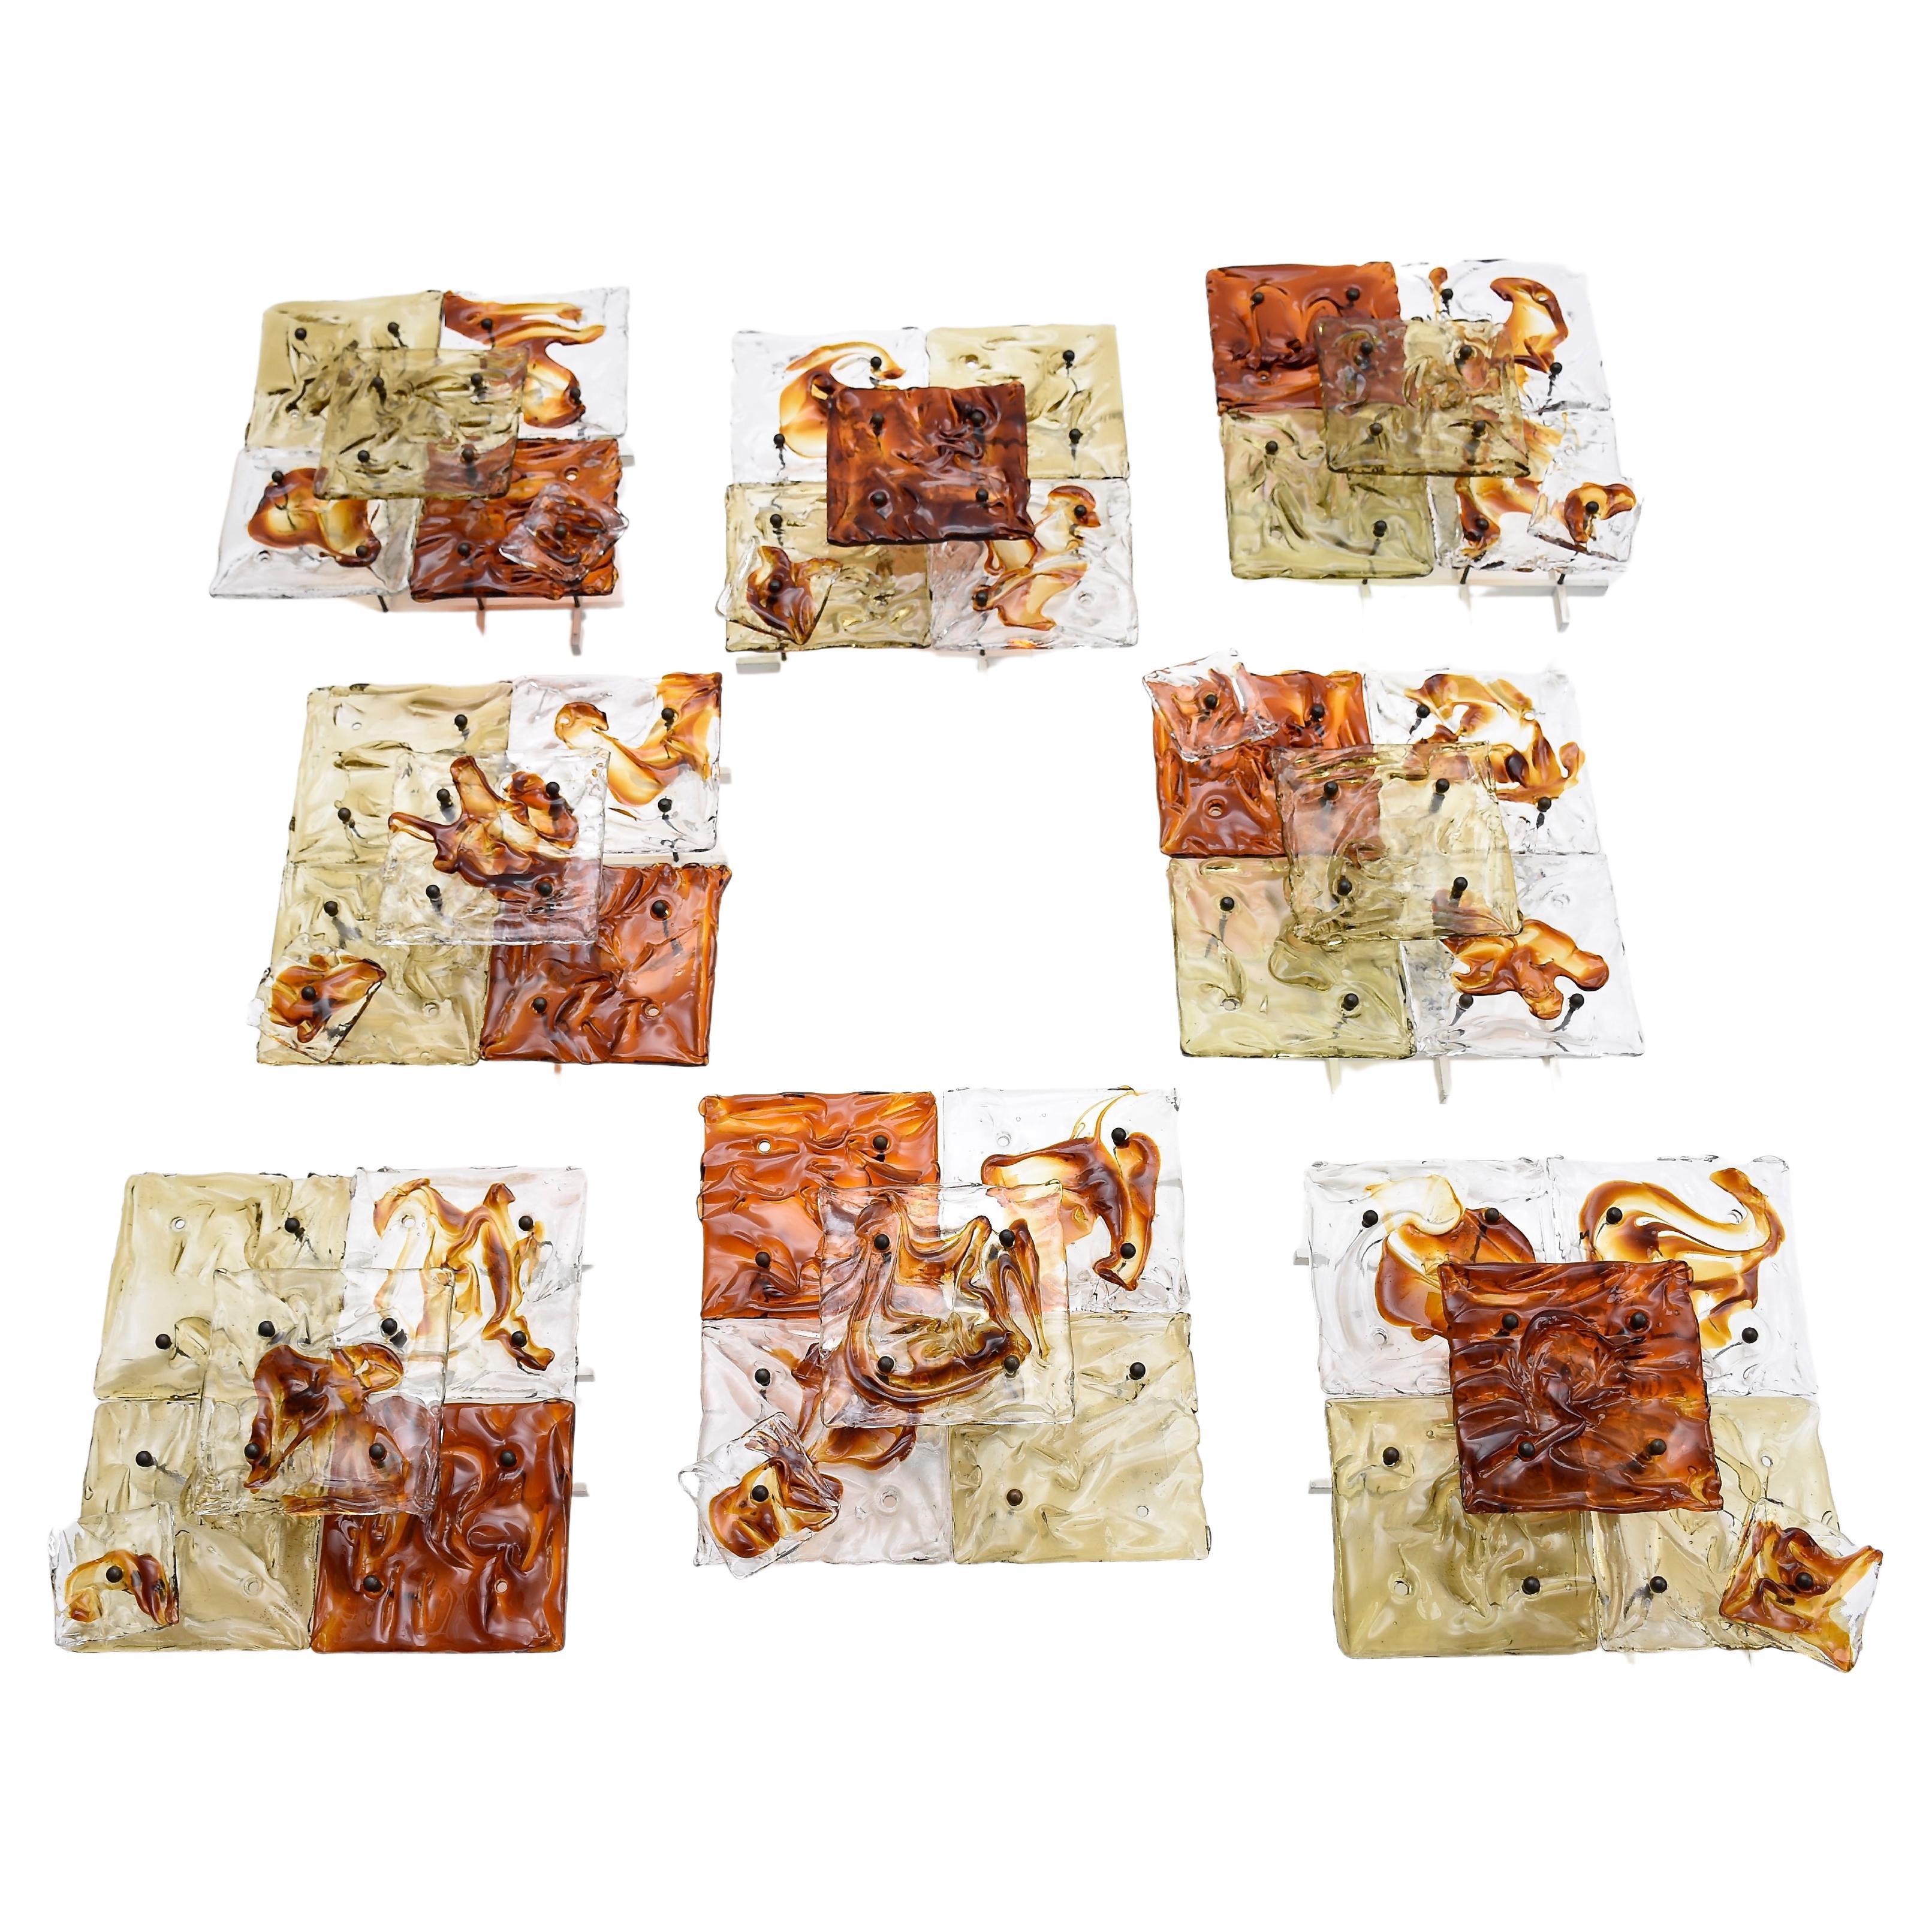 Mid-century Venini Murano patchwork wall appliques 'Cheerio'-8x pieces available For Sale